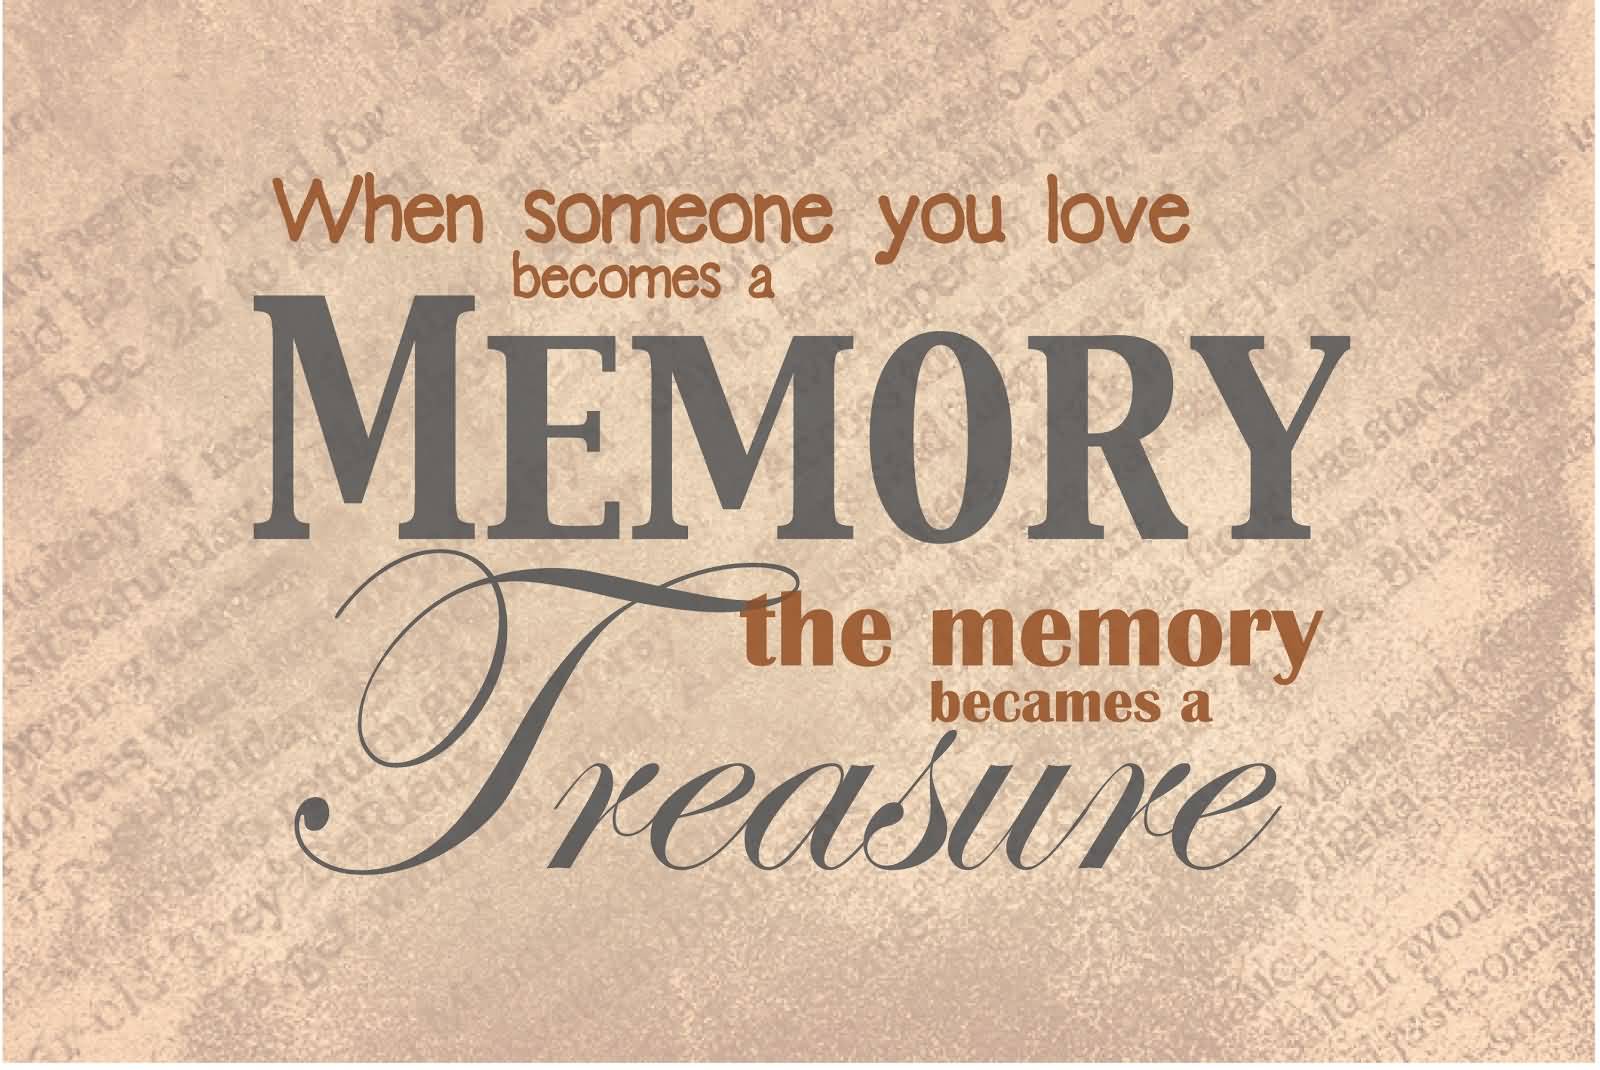 61 Great Memory Quotes And Sayings For Inspiration